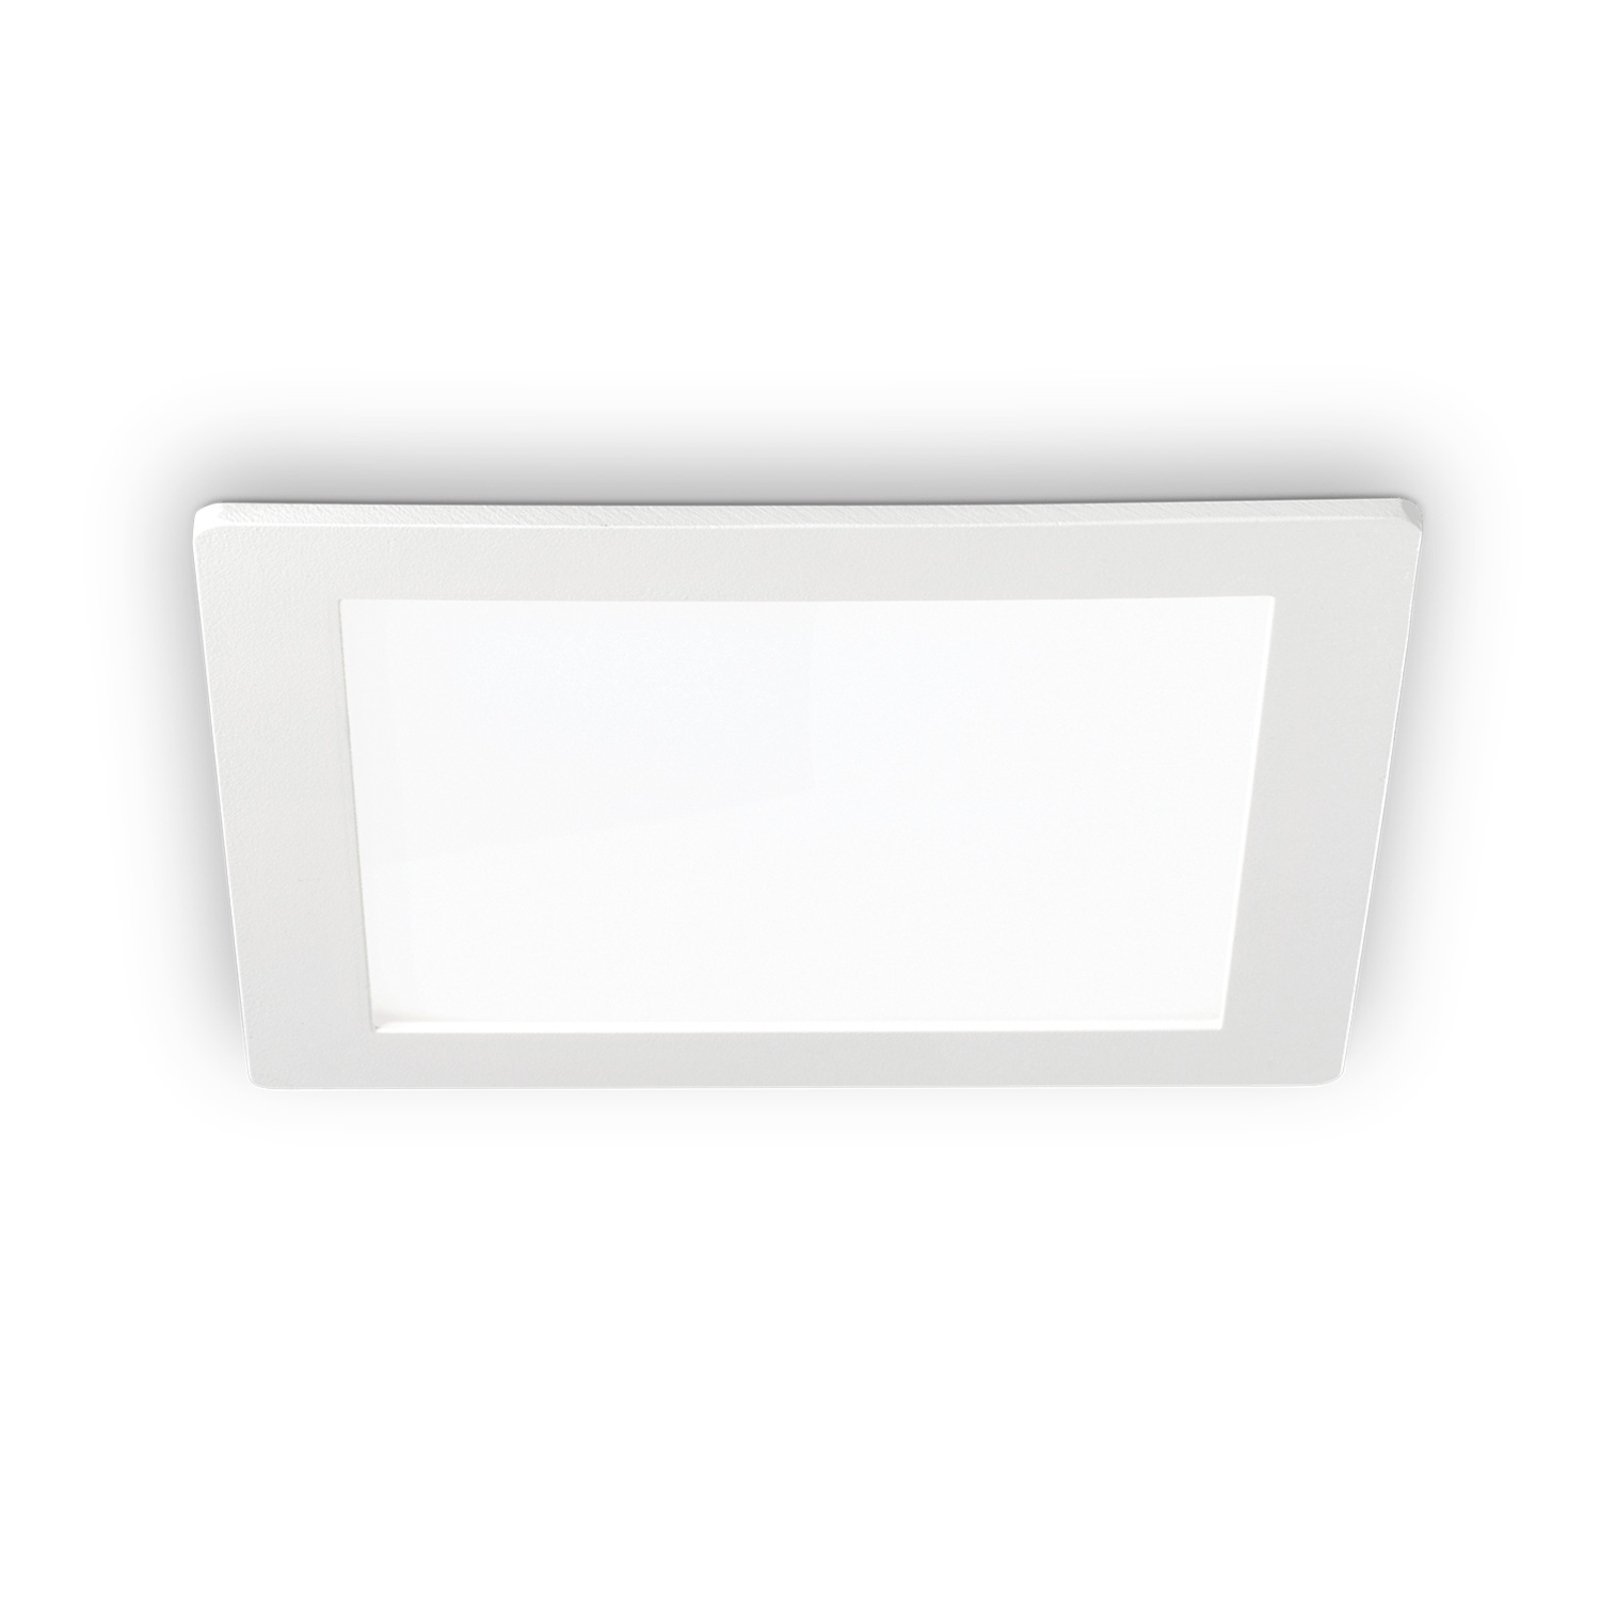 Groove square LED downlight 16.8 x 16.8 cm